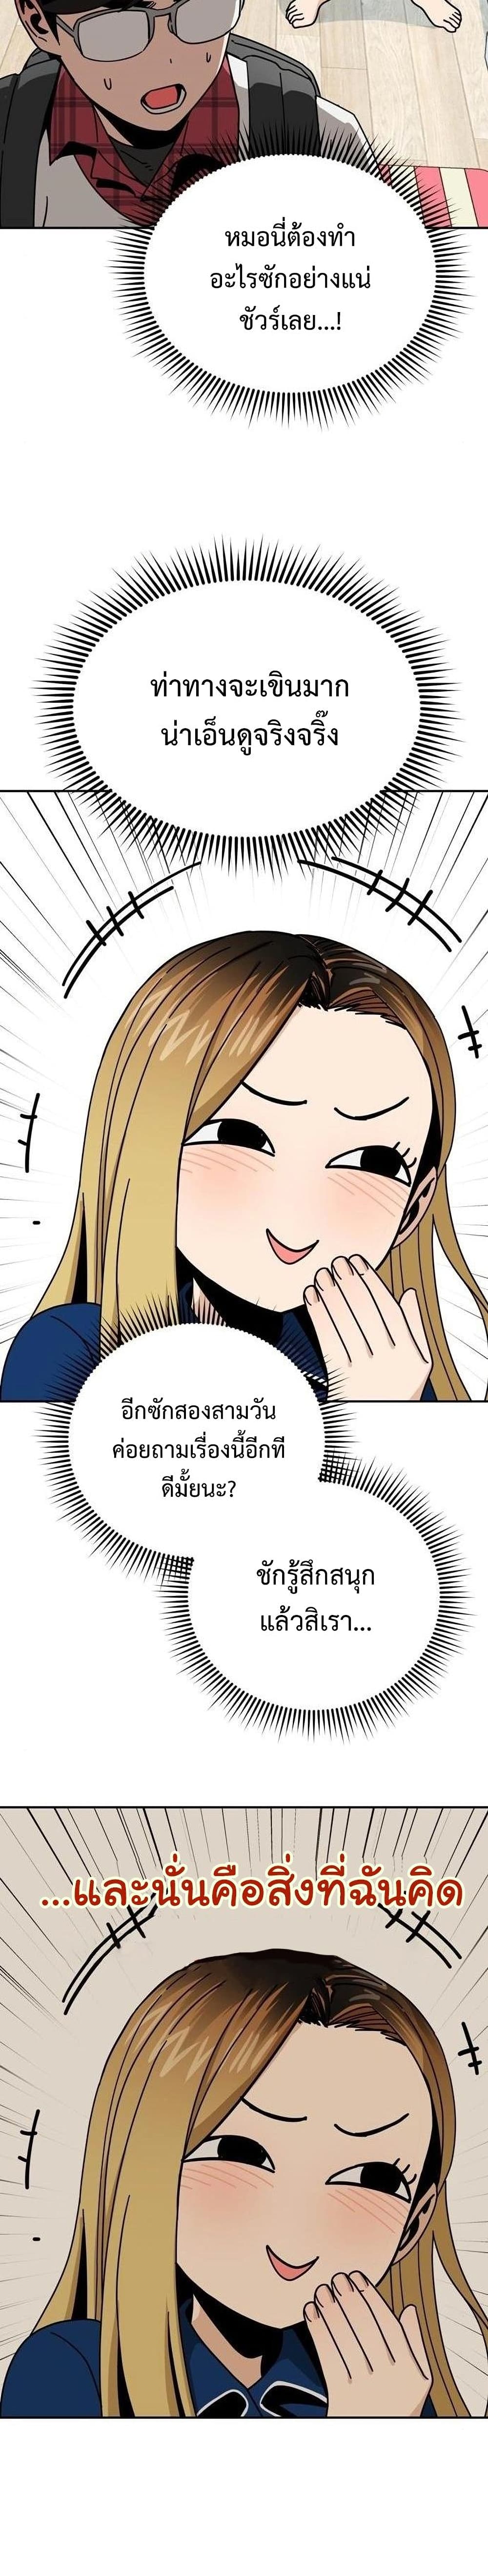 Match Made in Heaven by chance ตอนที่ 34 (31)